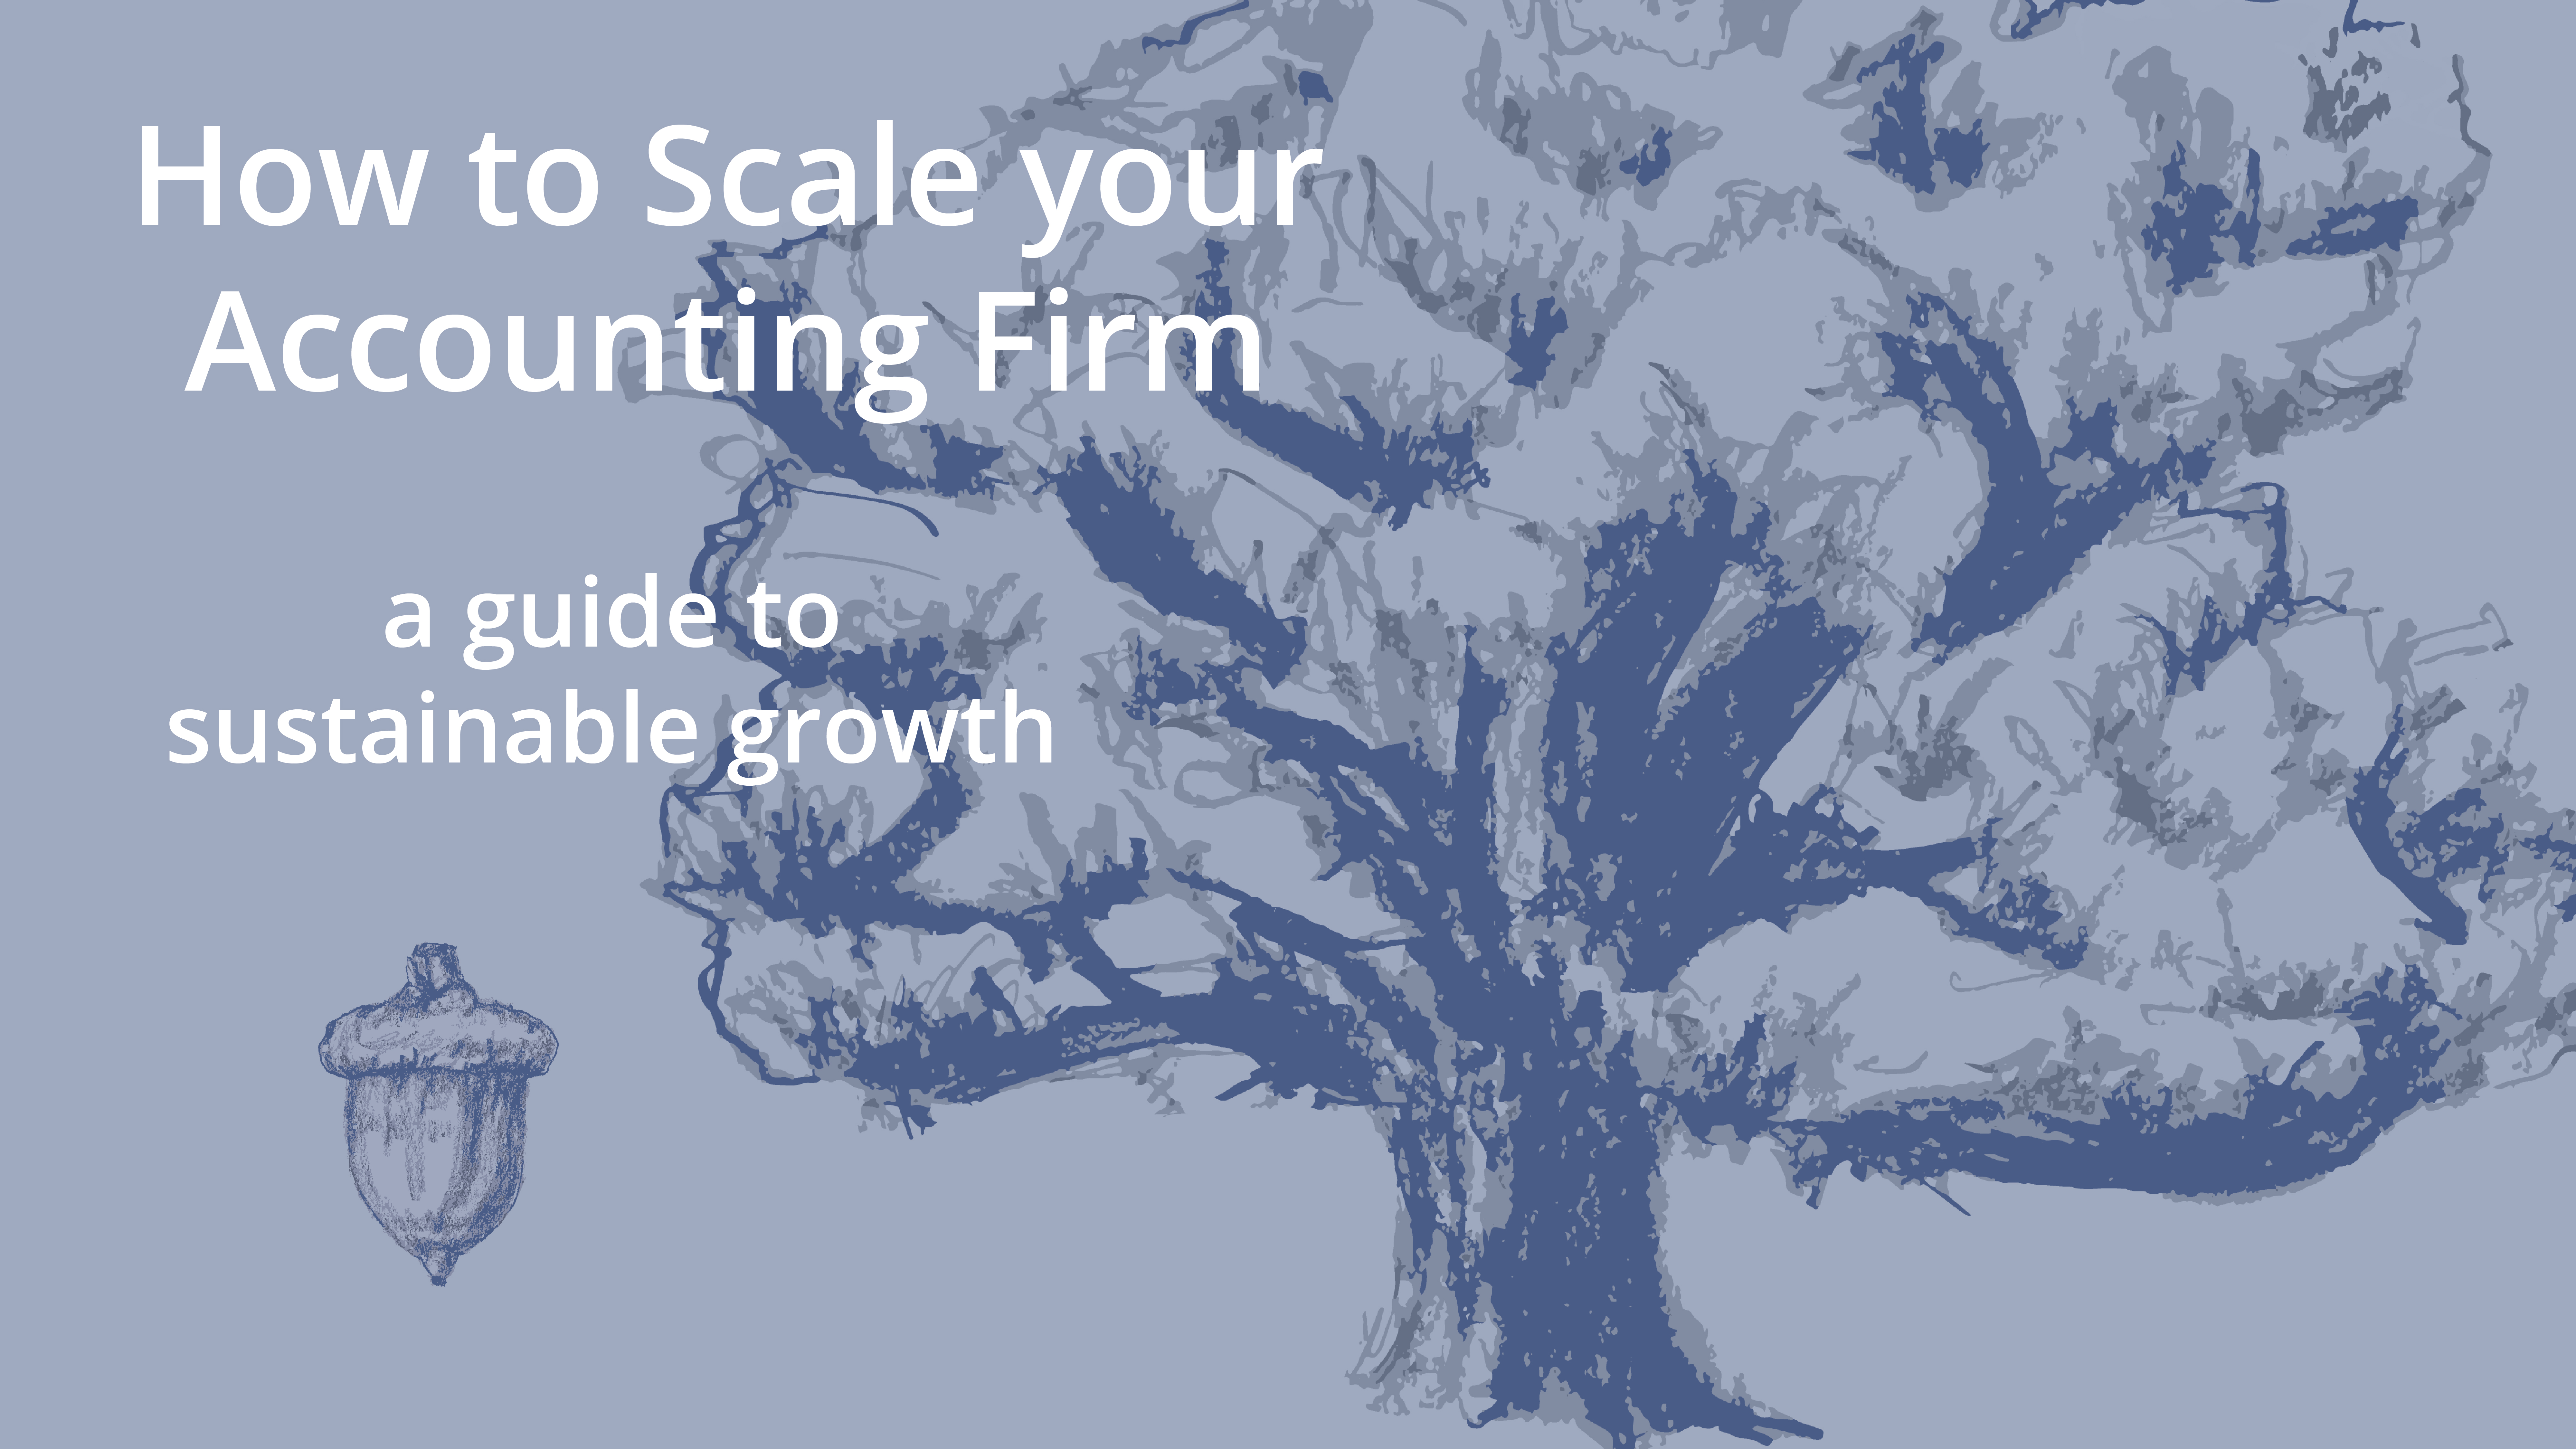 How to Scale Your Accounting Firm